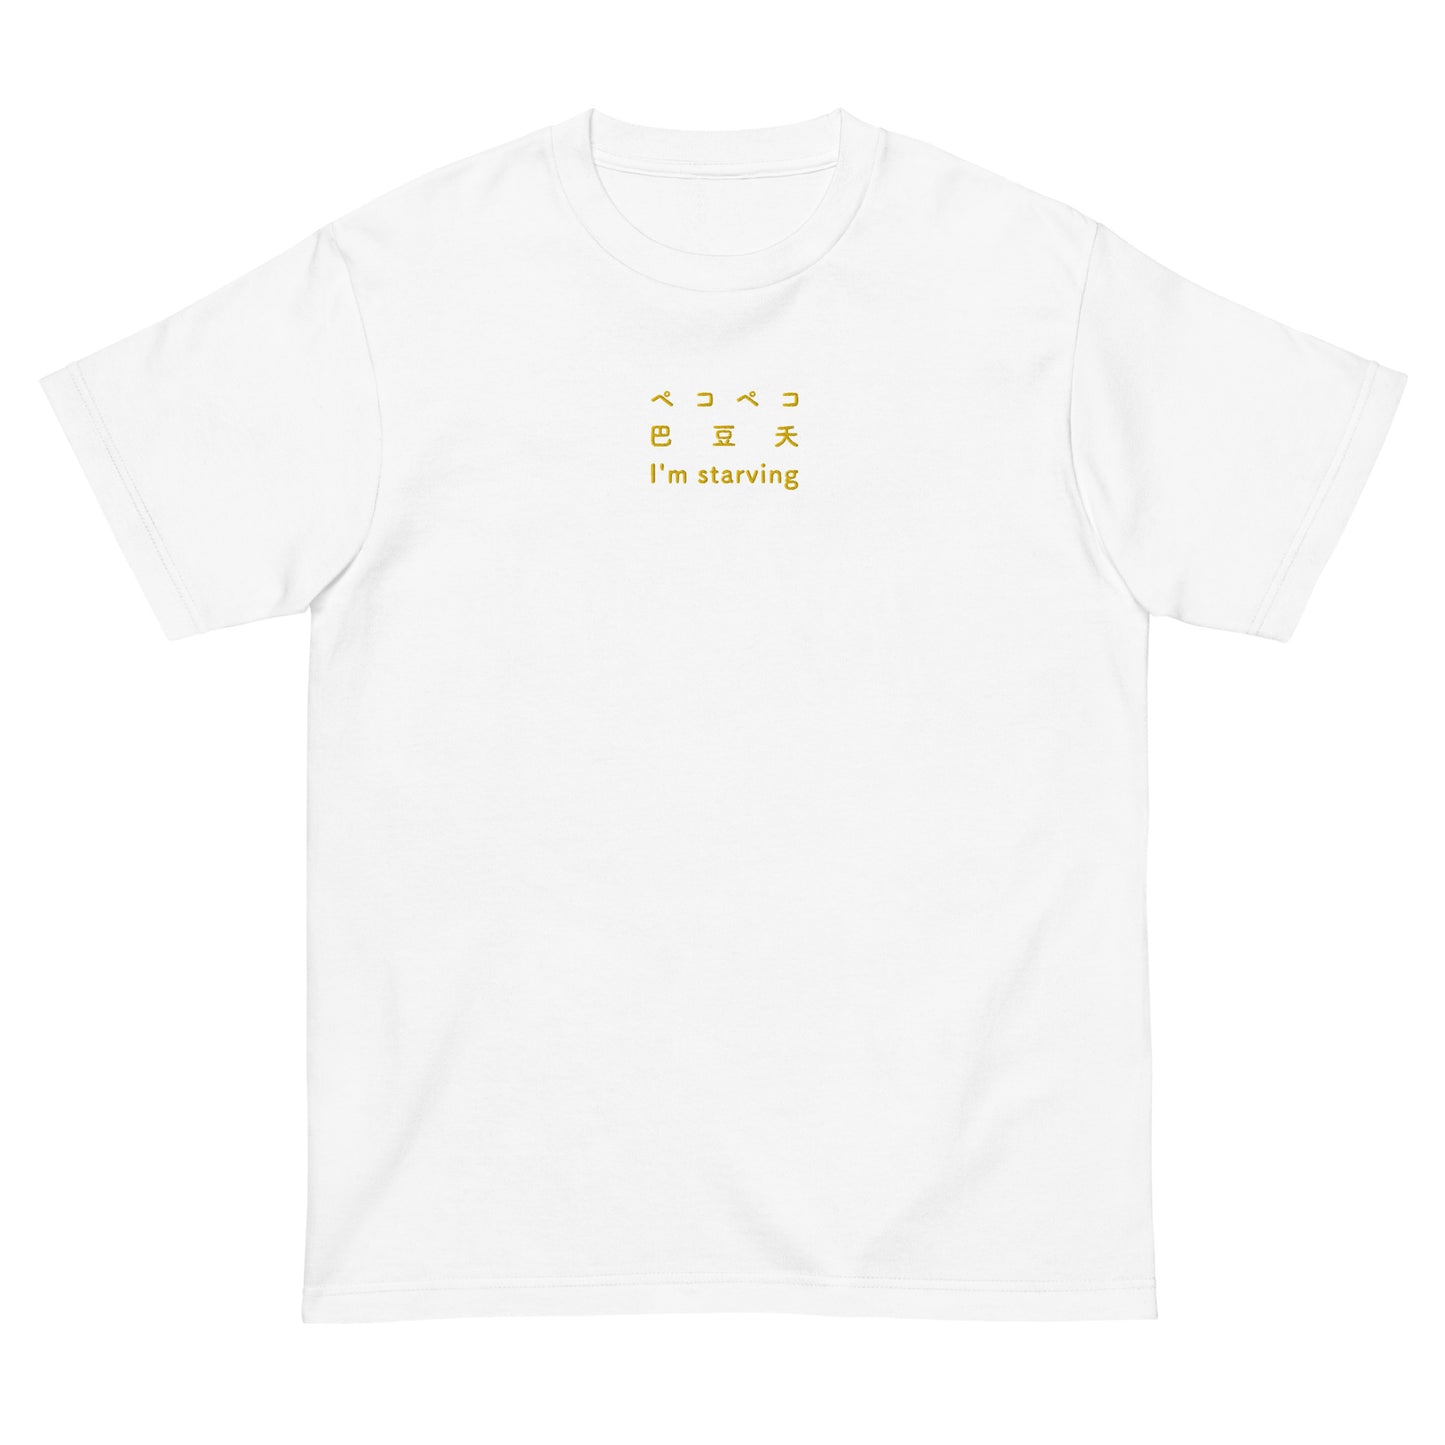 White High Quality Tee - Front Design with an Yellow Embroidery "I'm Starving" in three languages